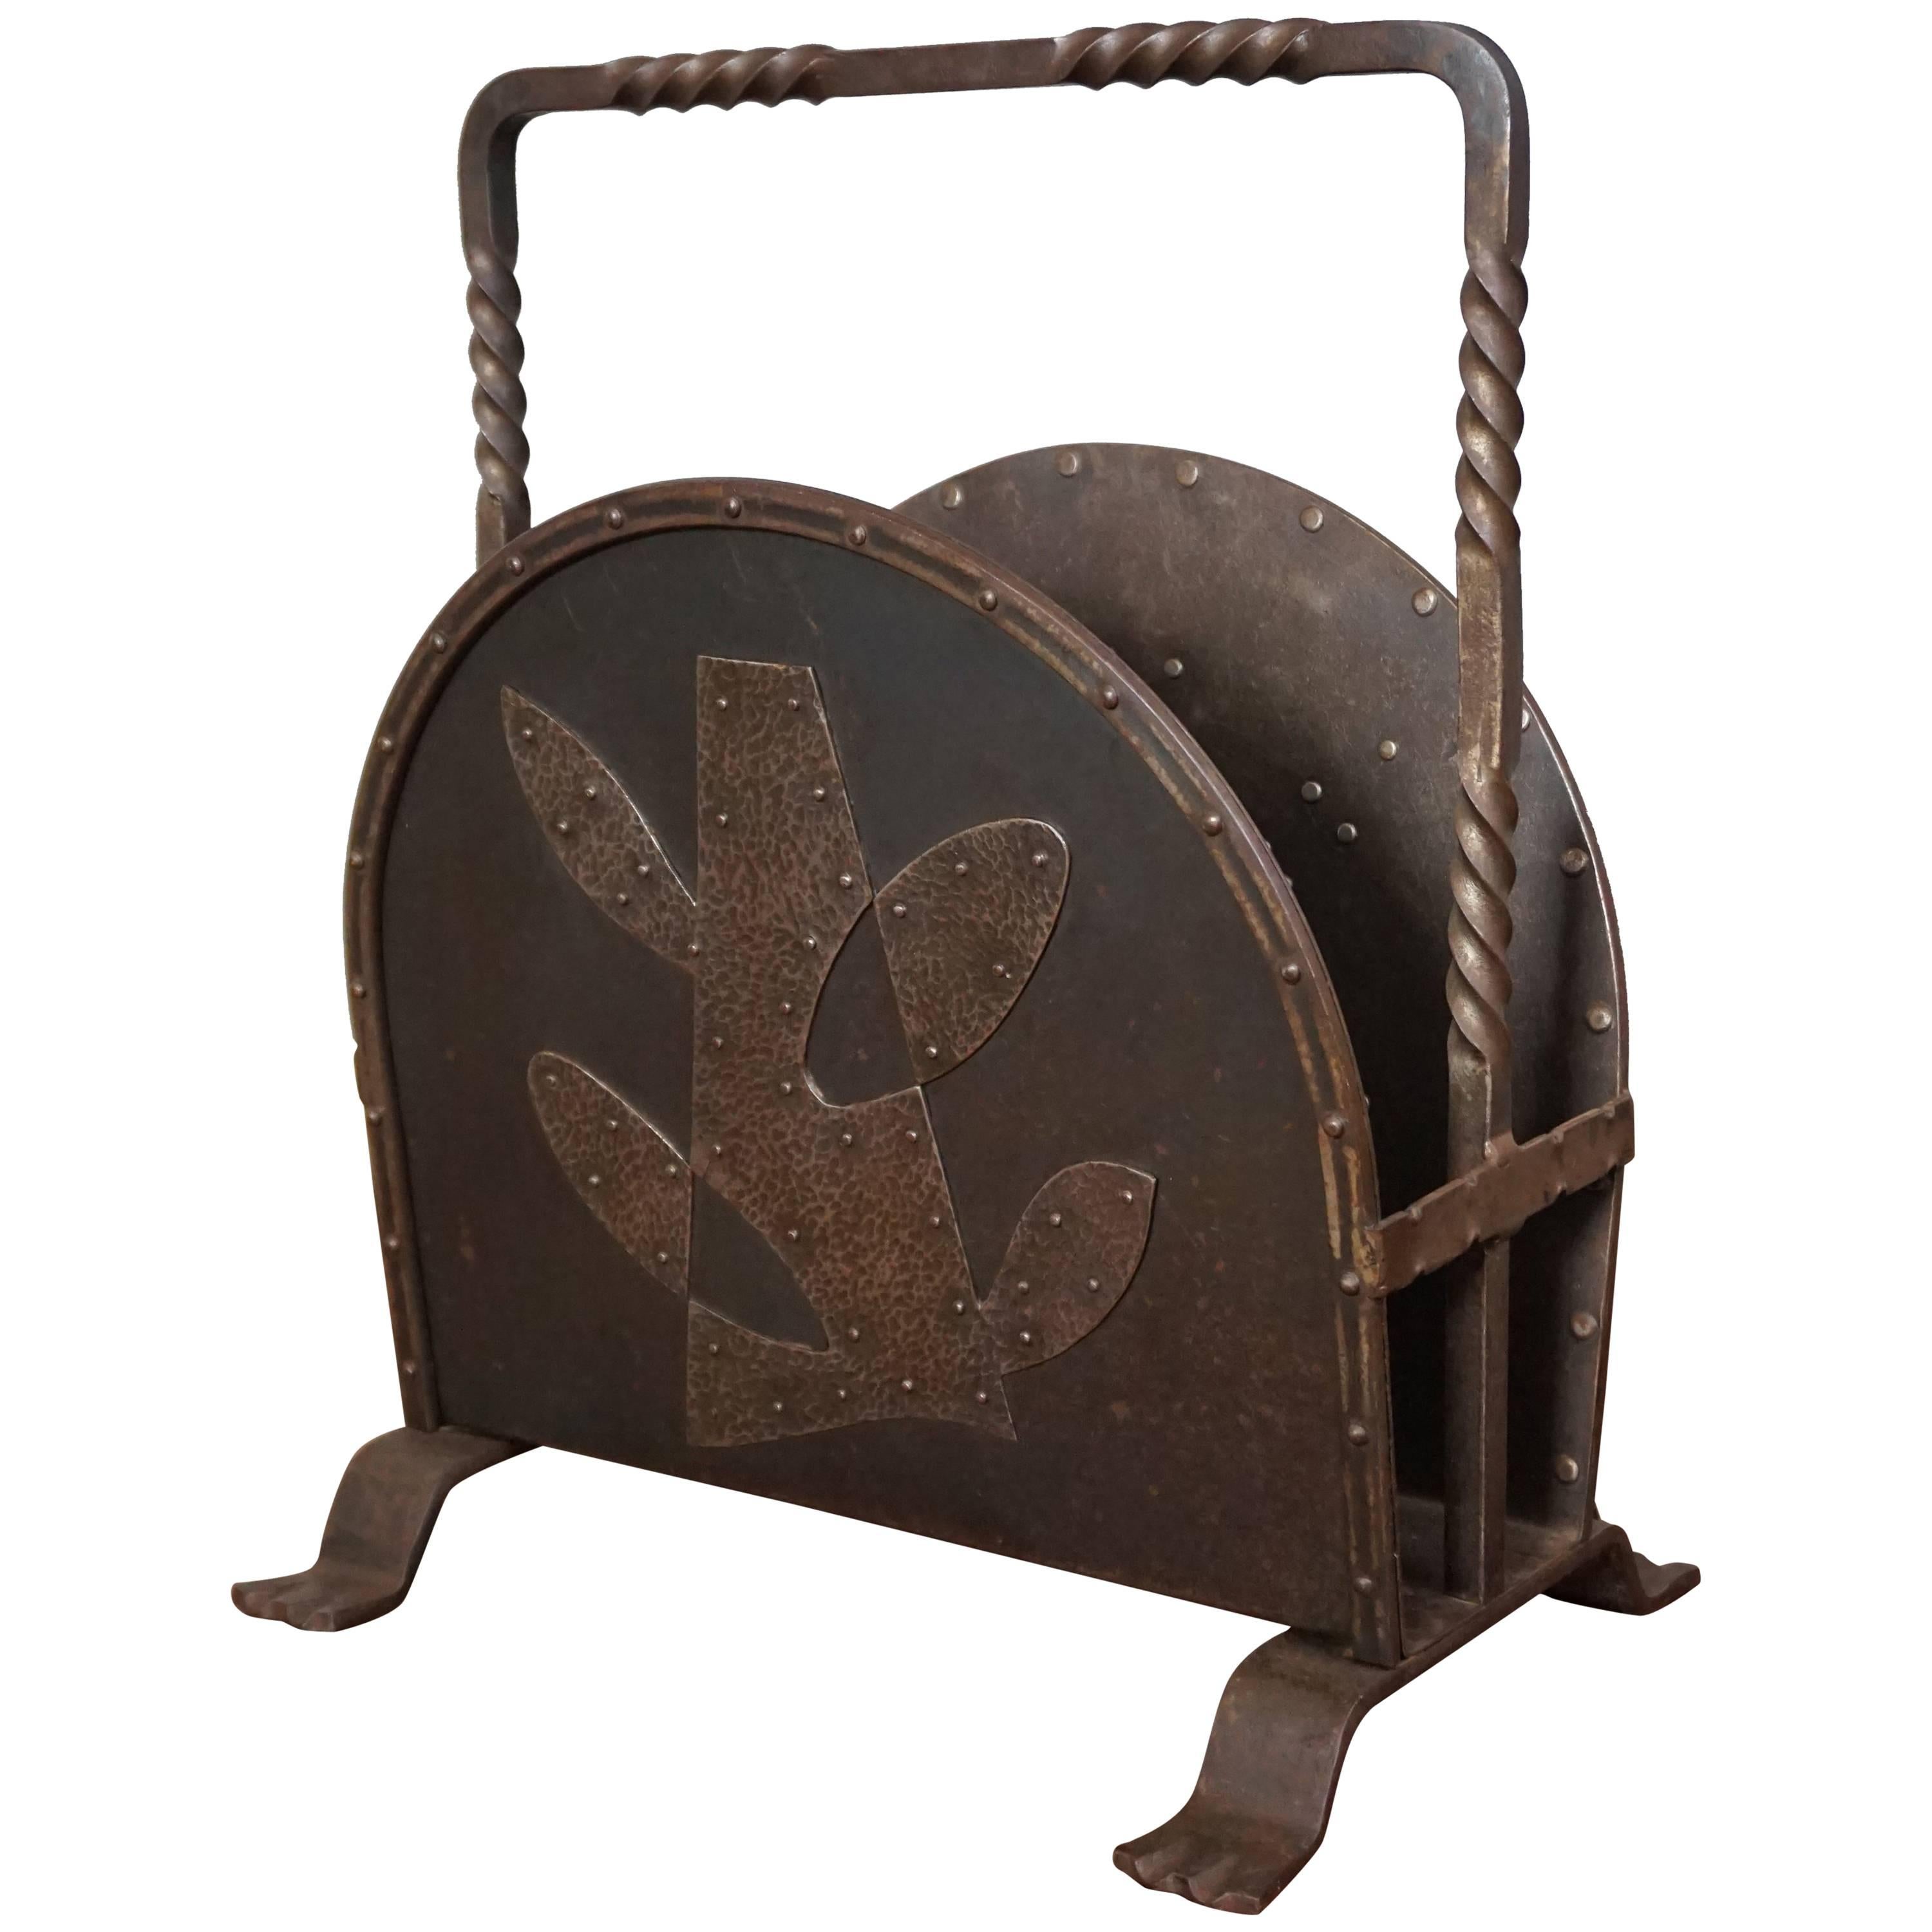 Unique Mid-Century Hand-Forged Wrought Iron Magazine Stand with Stylized Tree